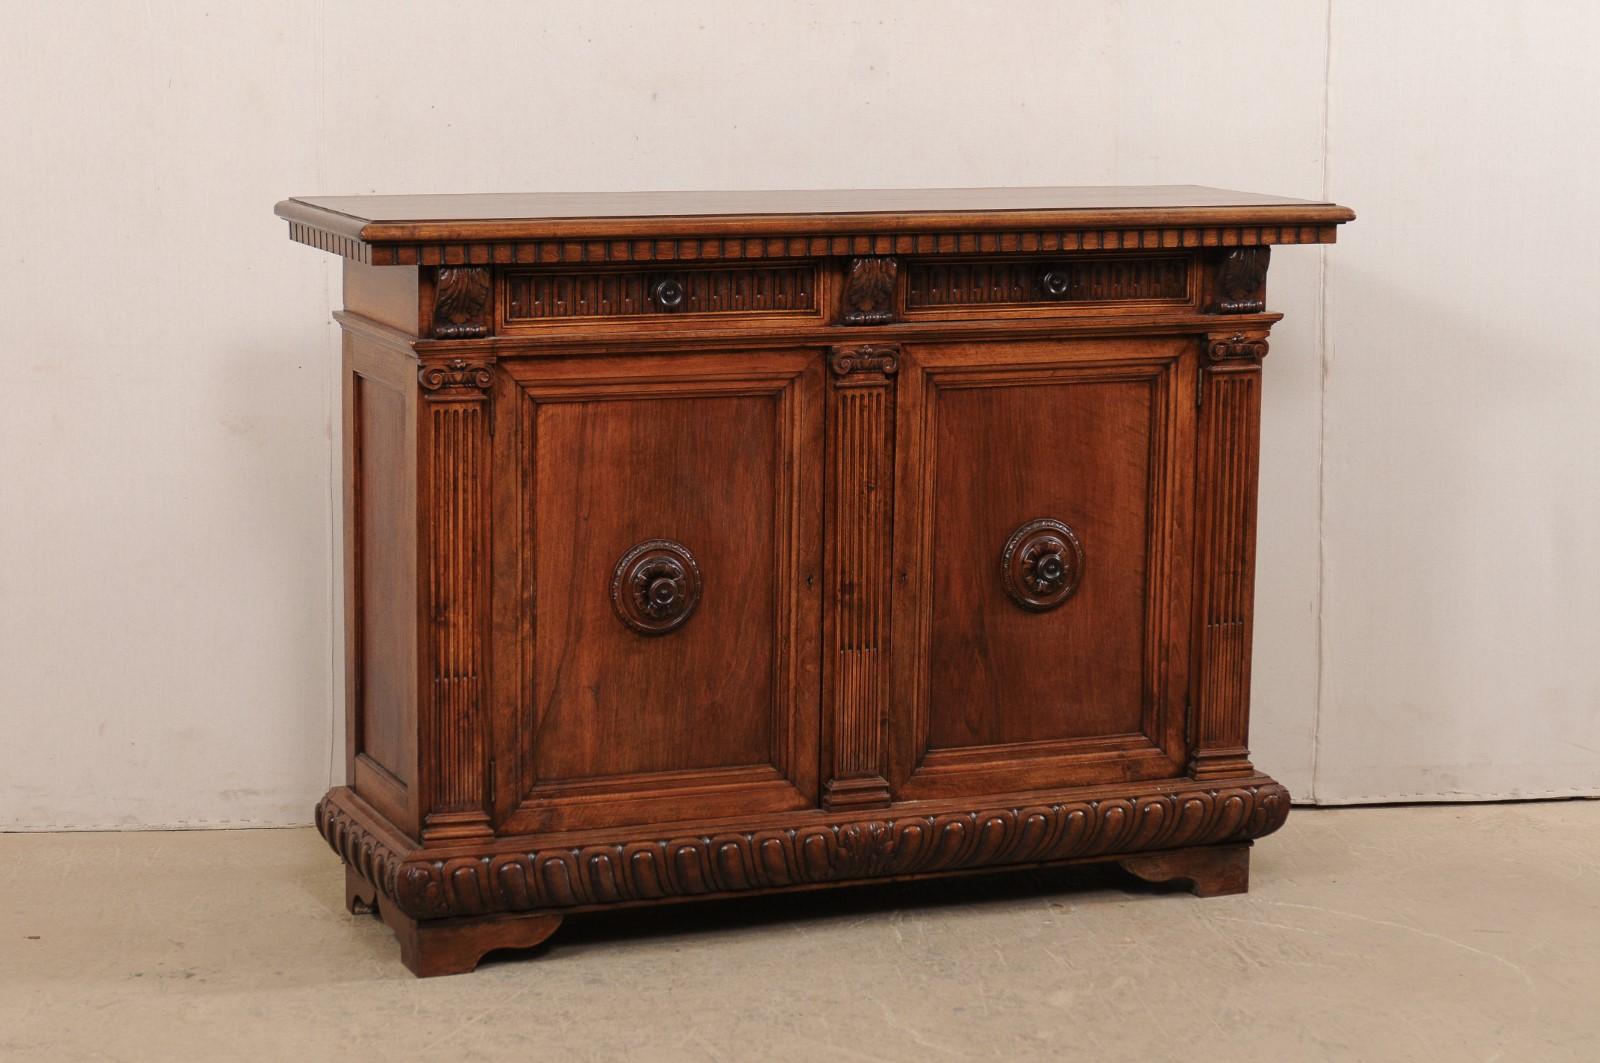 An Italian carved walnut wood credenza from the turn of the 19th and 20th century. This antique buffet from Italy features rich walnut wood which has been exquisitely carved with dentil trim, egg-n-dart trim, acanthus leaf accents, and fluted